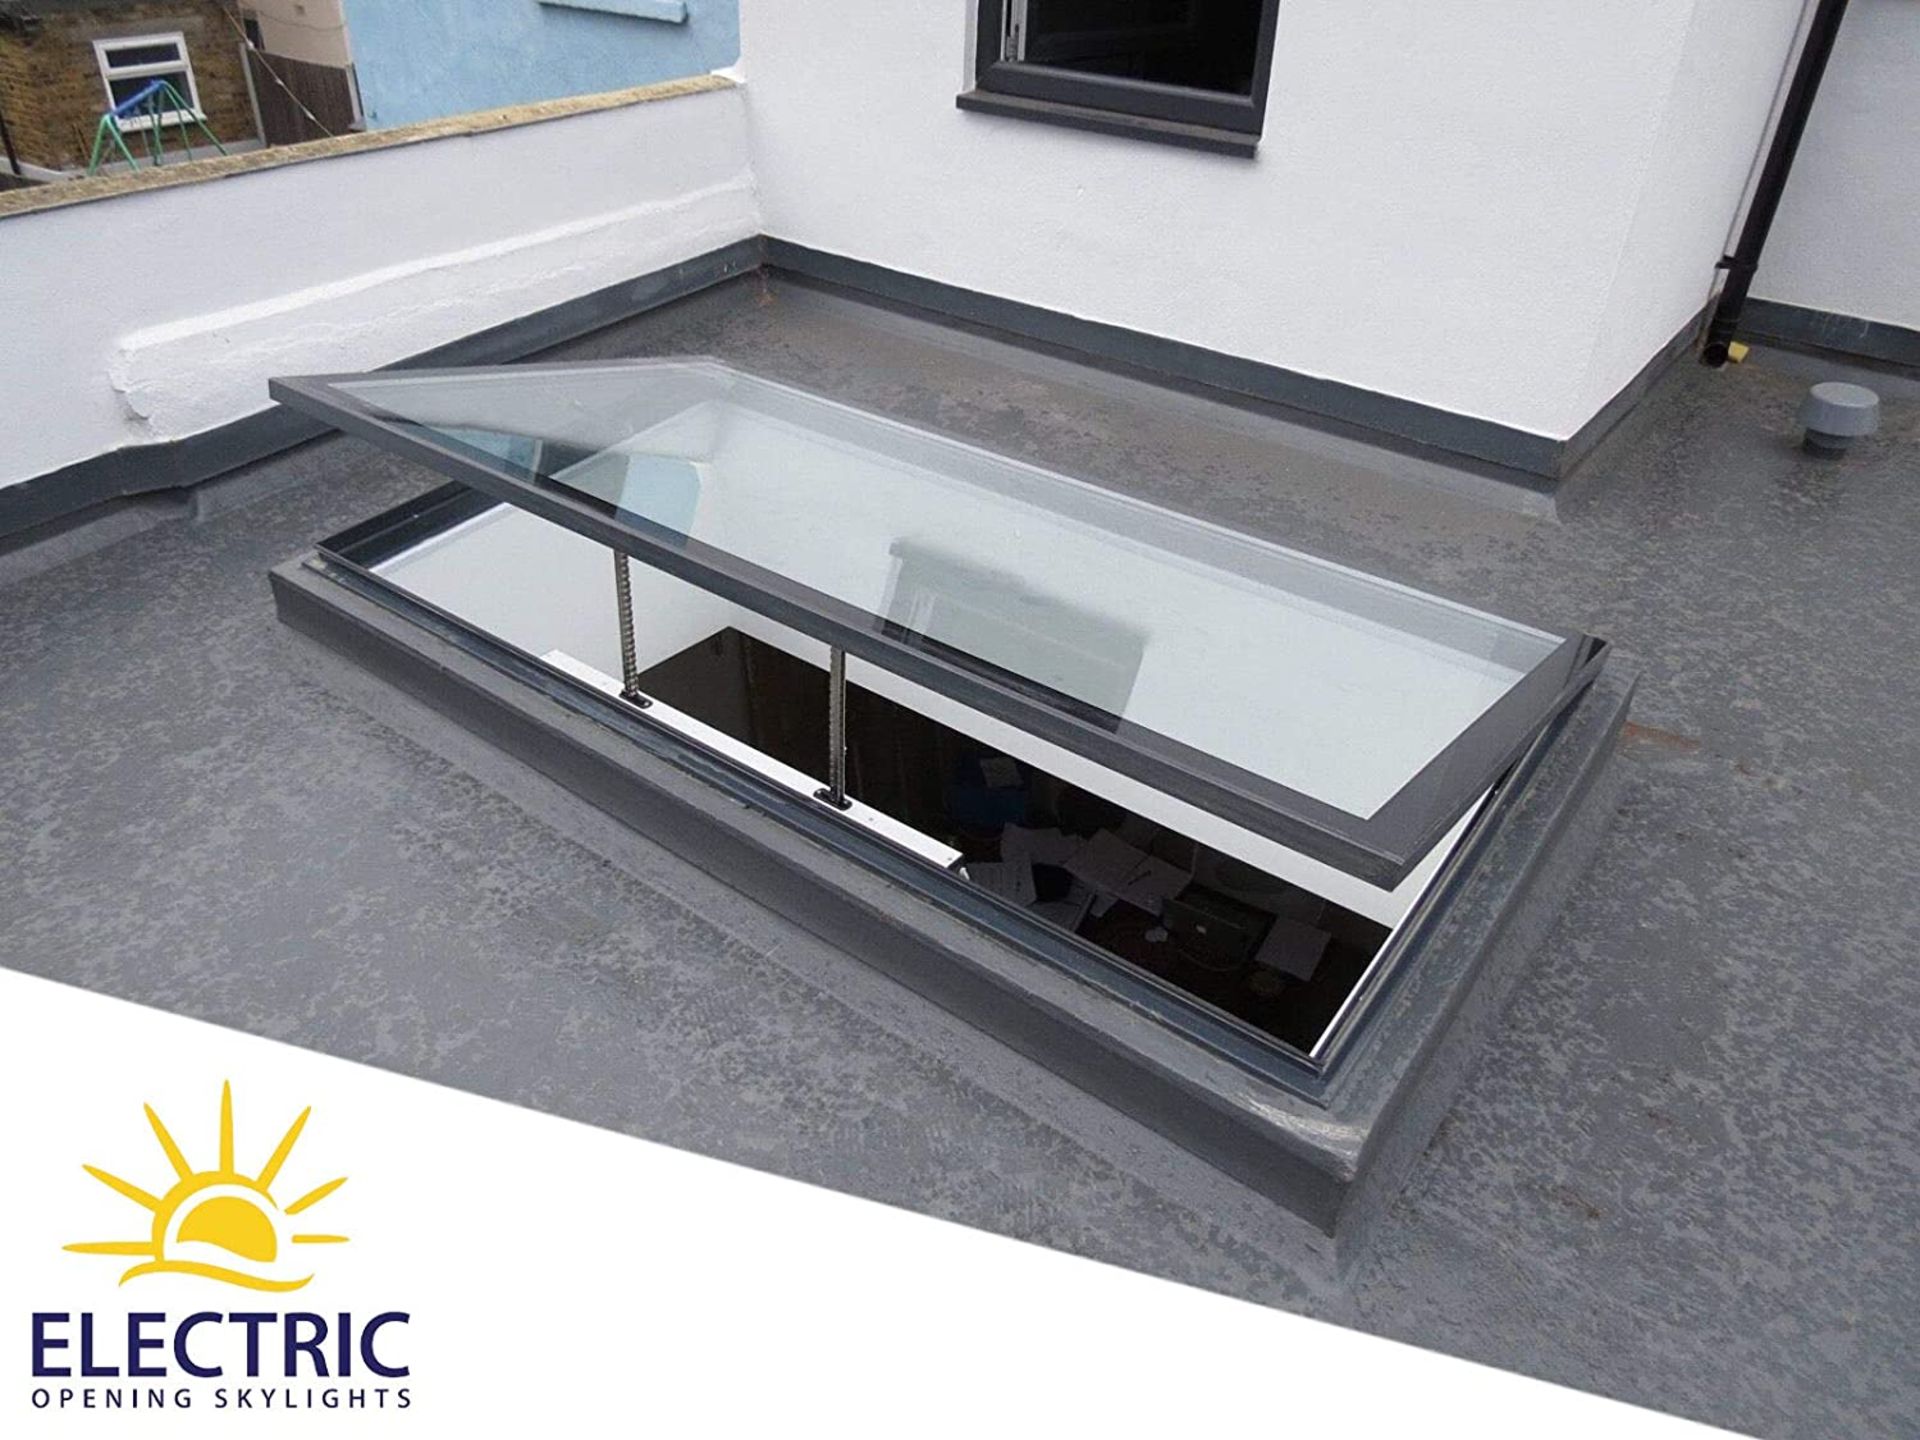 Panoroof (EOS) Electric Opening Skylight 1000x1000mm - Aluminiun Frame Double Glazed Laminated